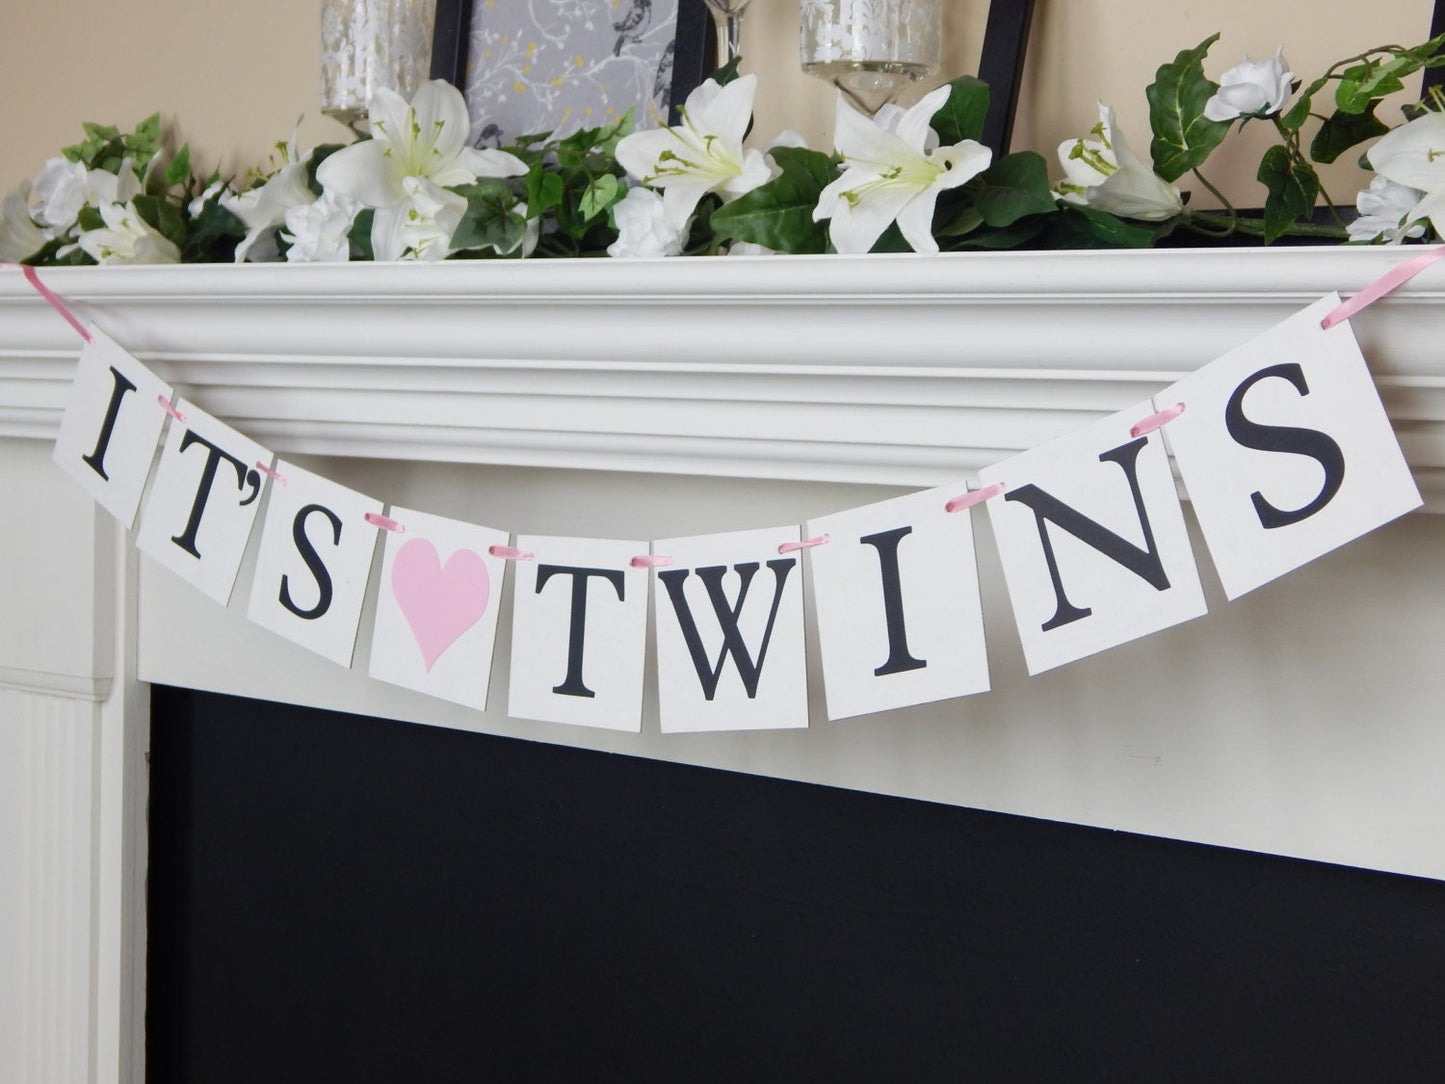 It's Twins Banner - Hearts